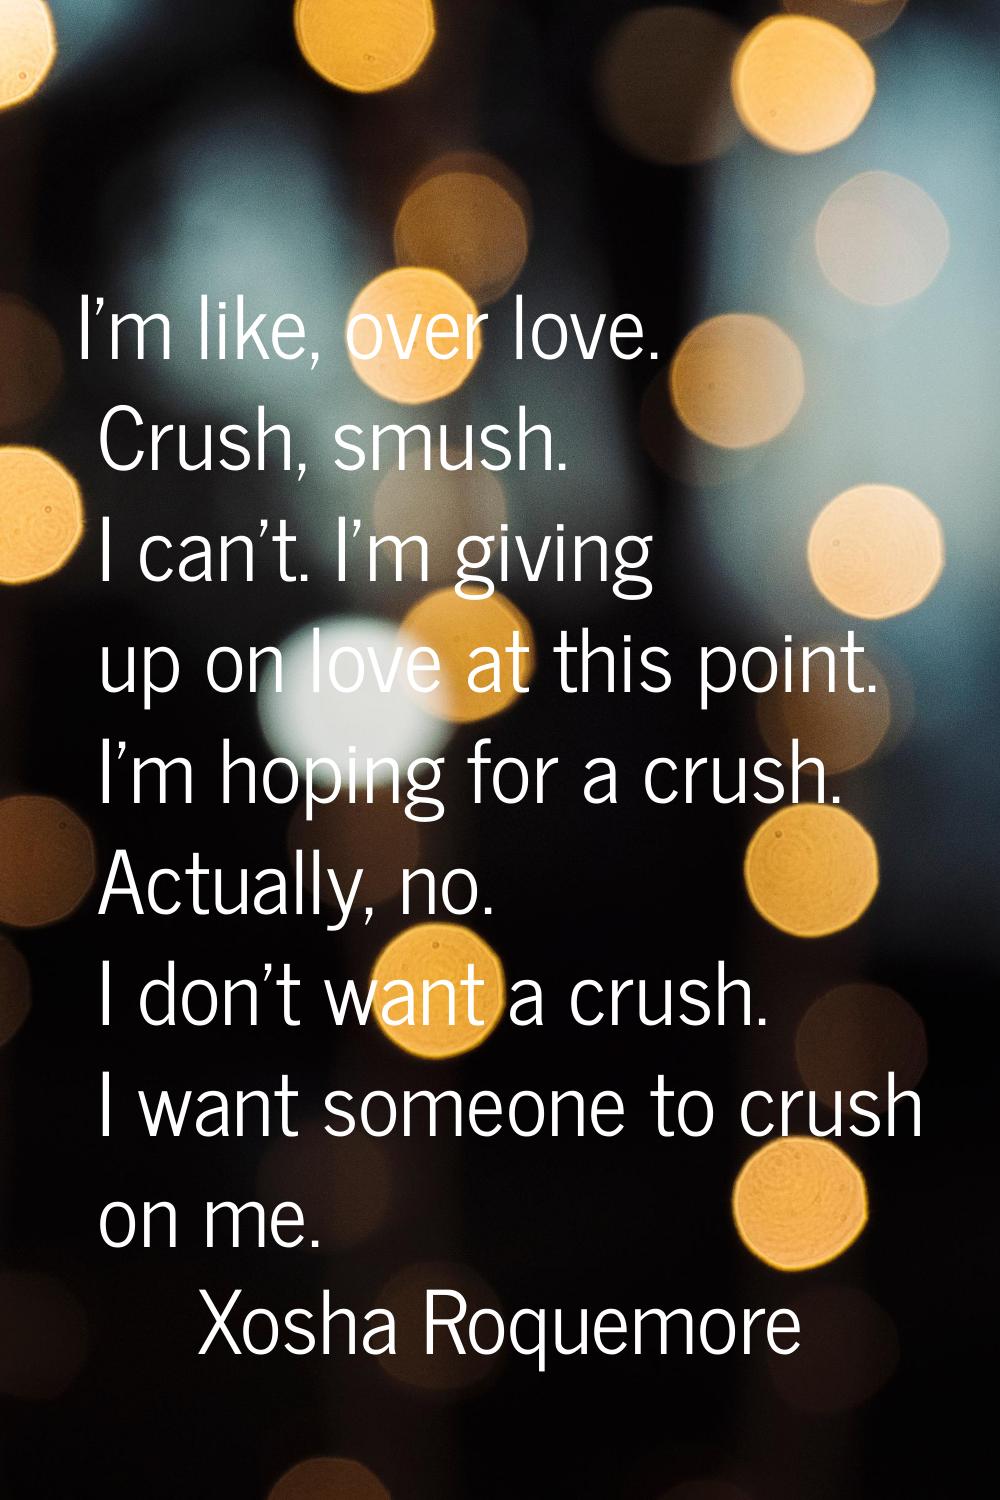 I'm like, over love. Crush, smush. I can't. I'm giving up on love at this point. I'm hoping for a c